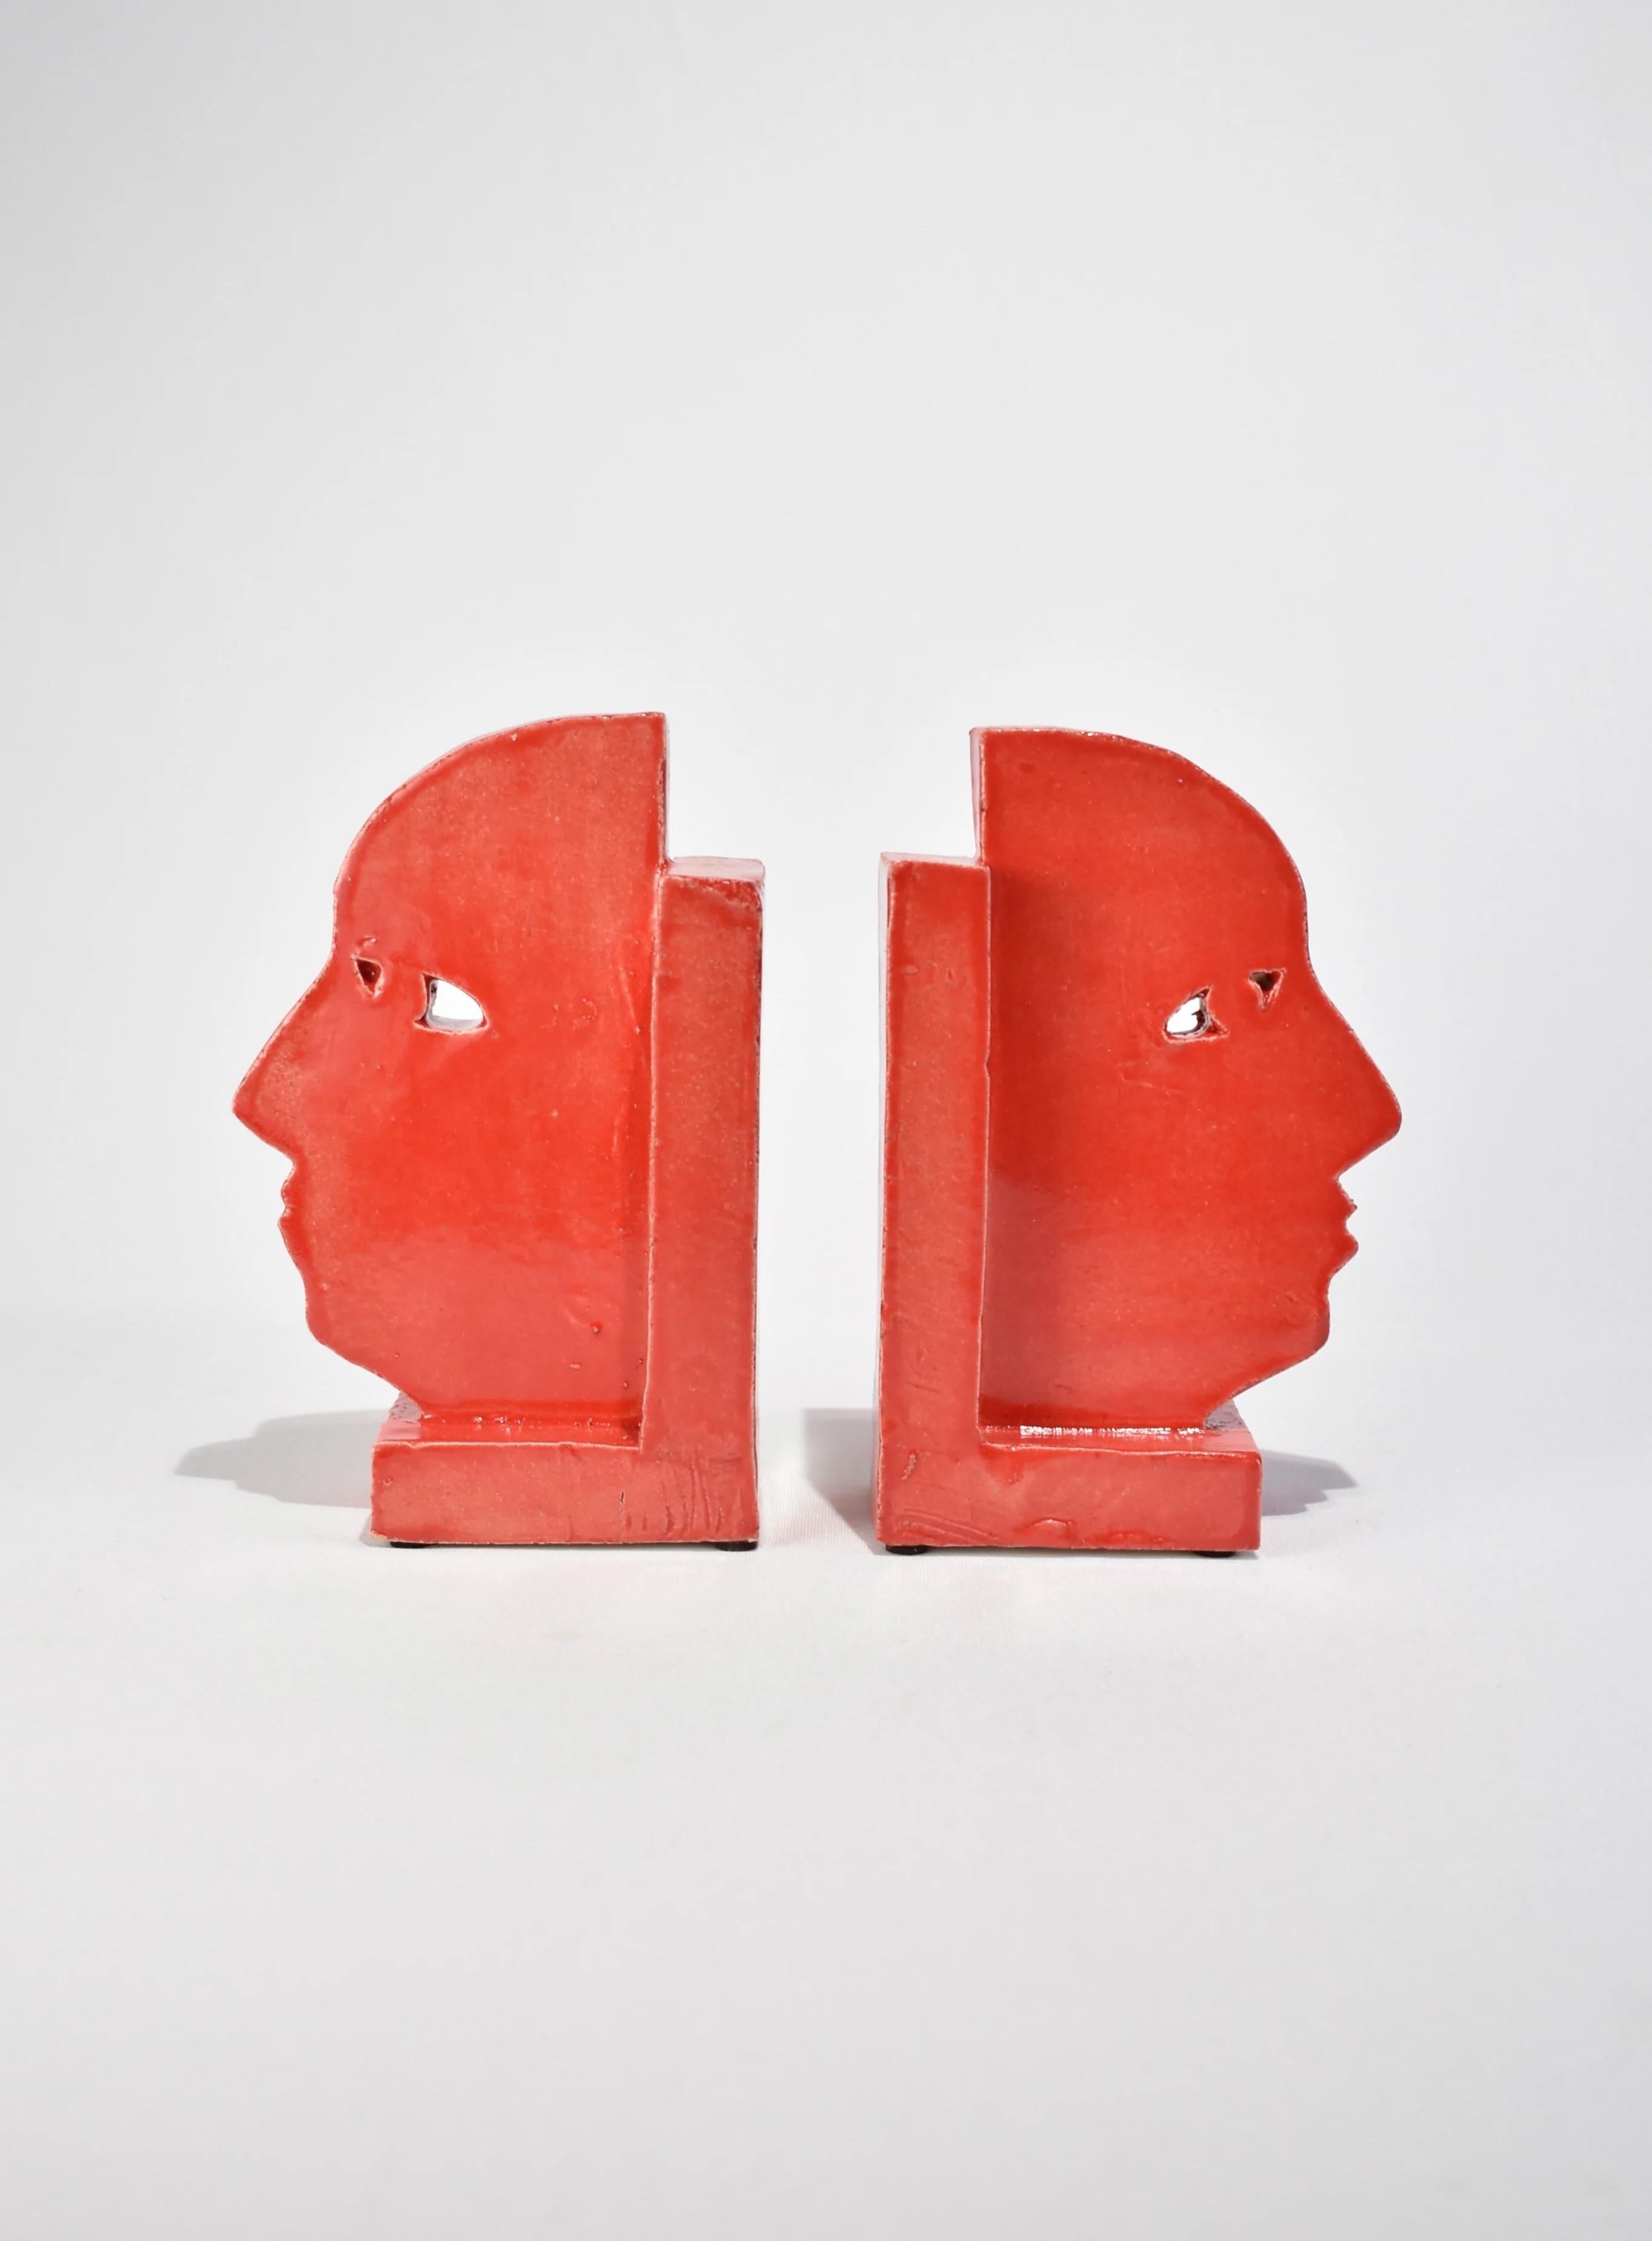 Glazed Profile Bookend in Red